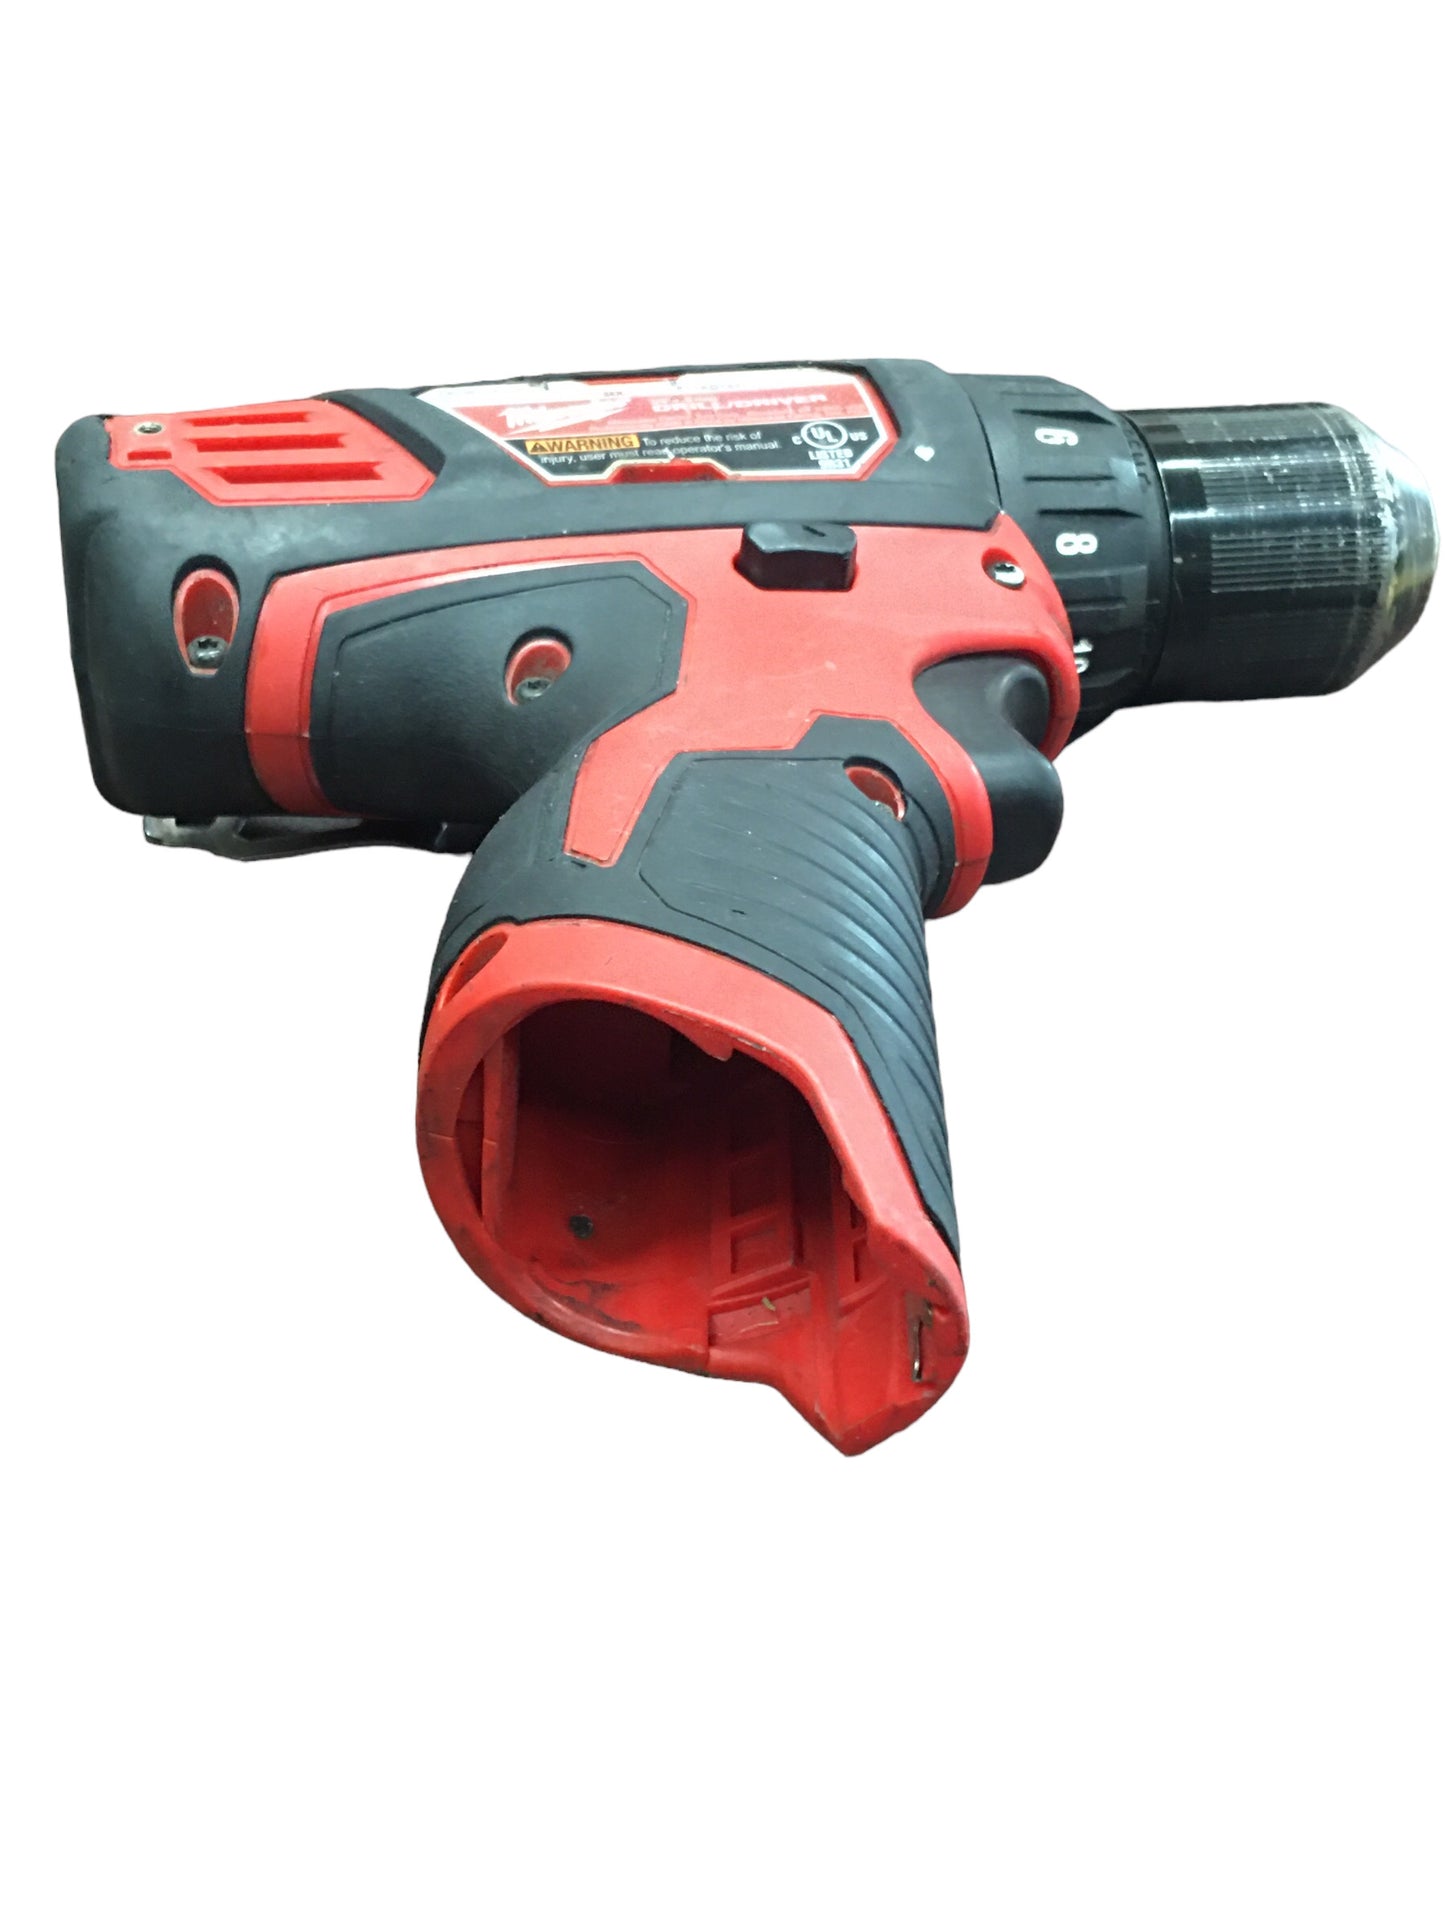 Secondhand Milwaukee 2407-20 Drill Driver